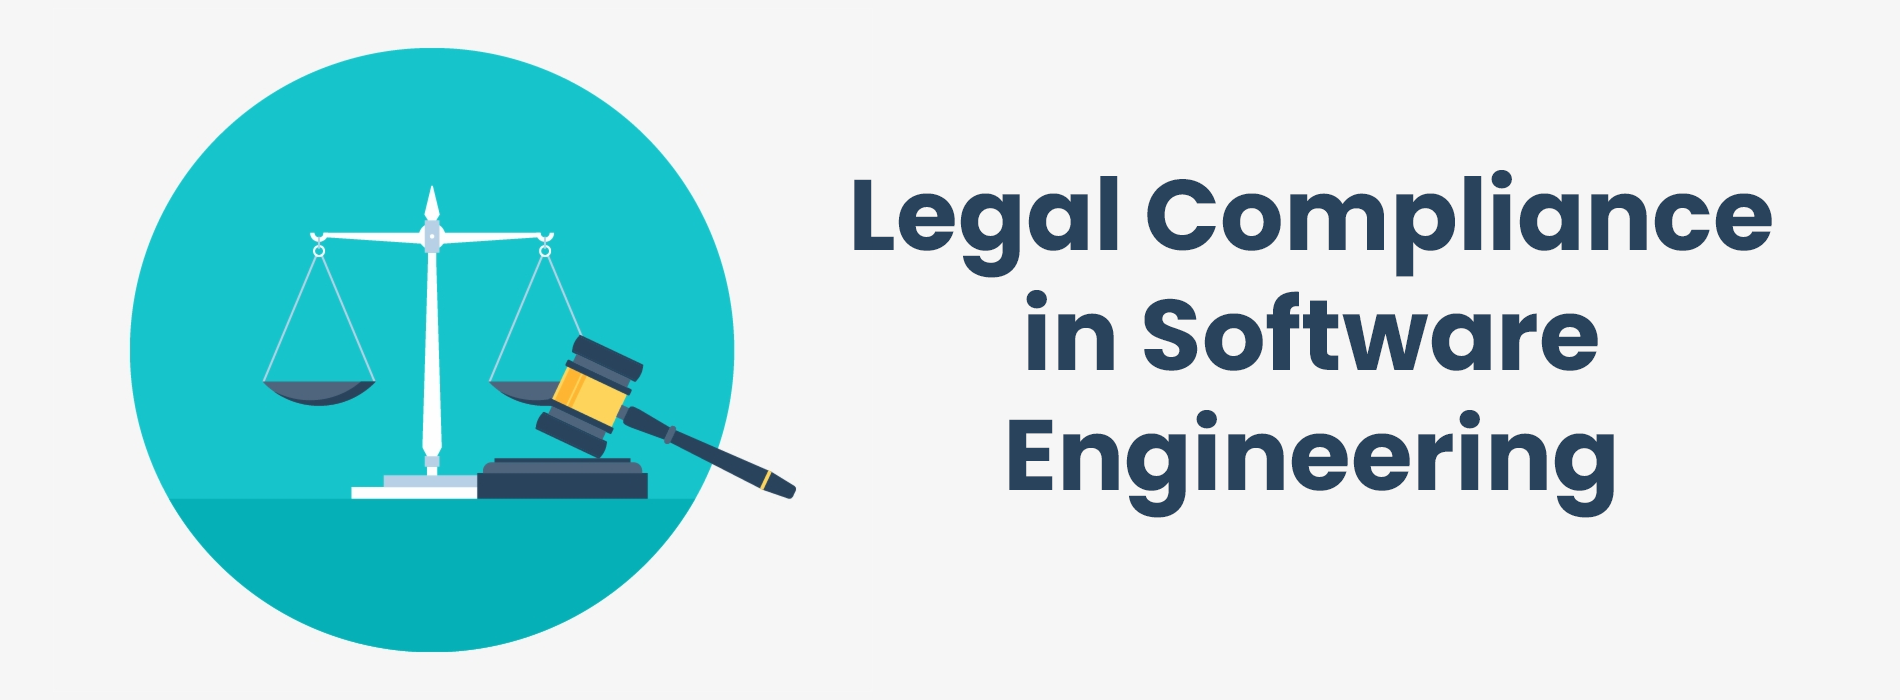 Legal Compliance in Software Engineering